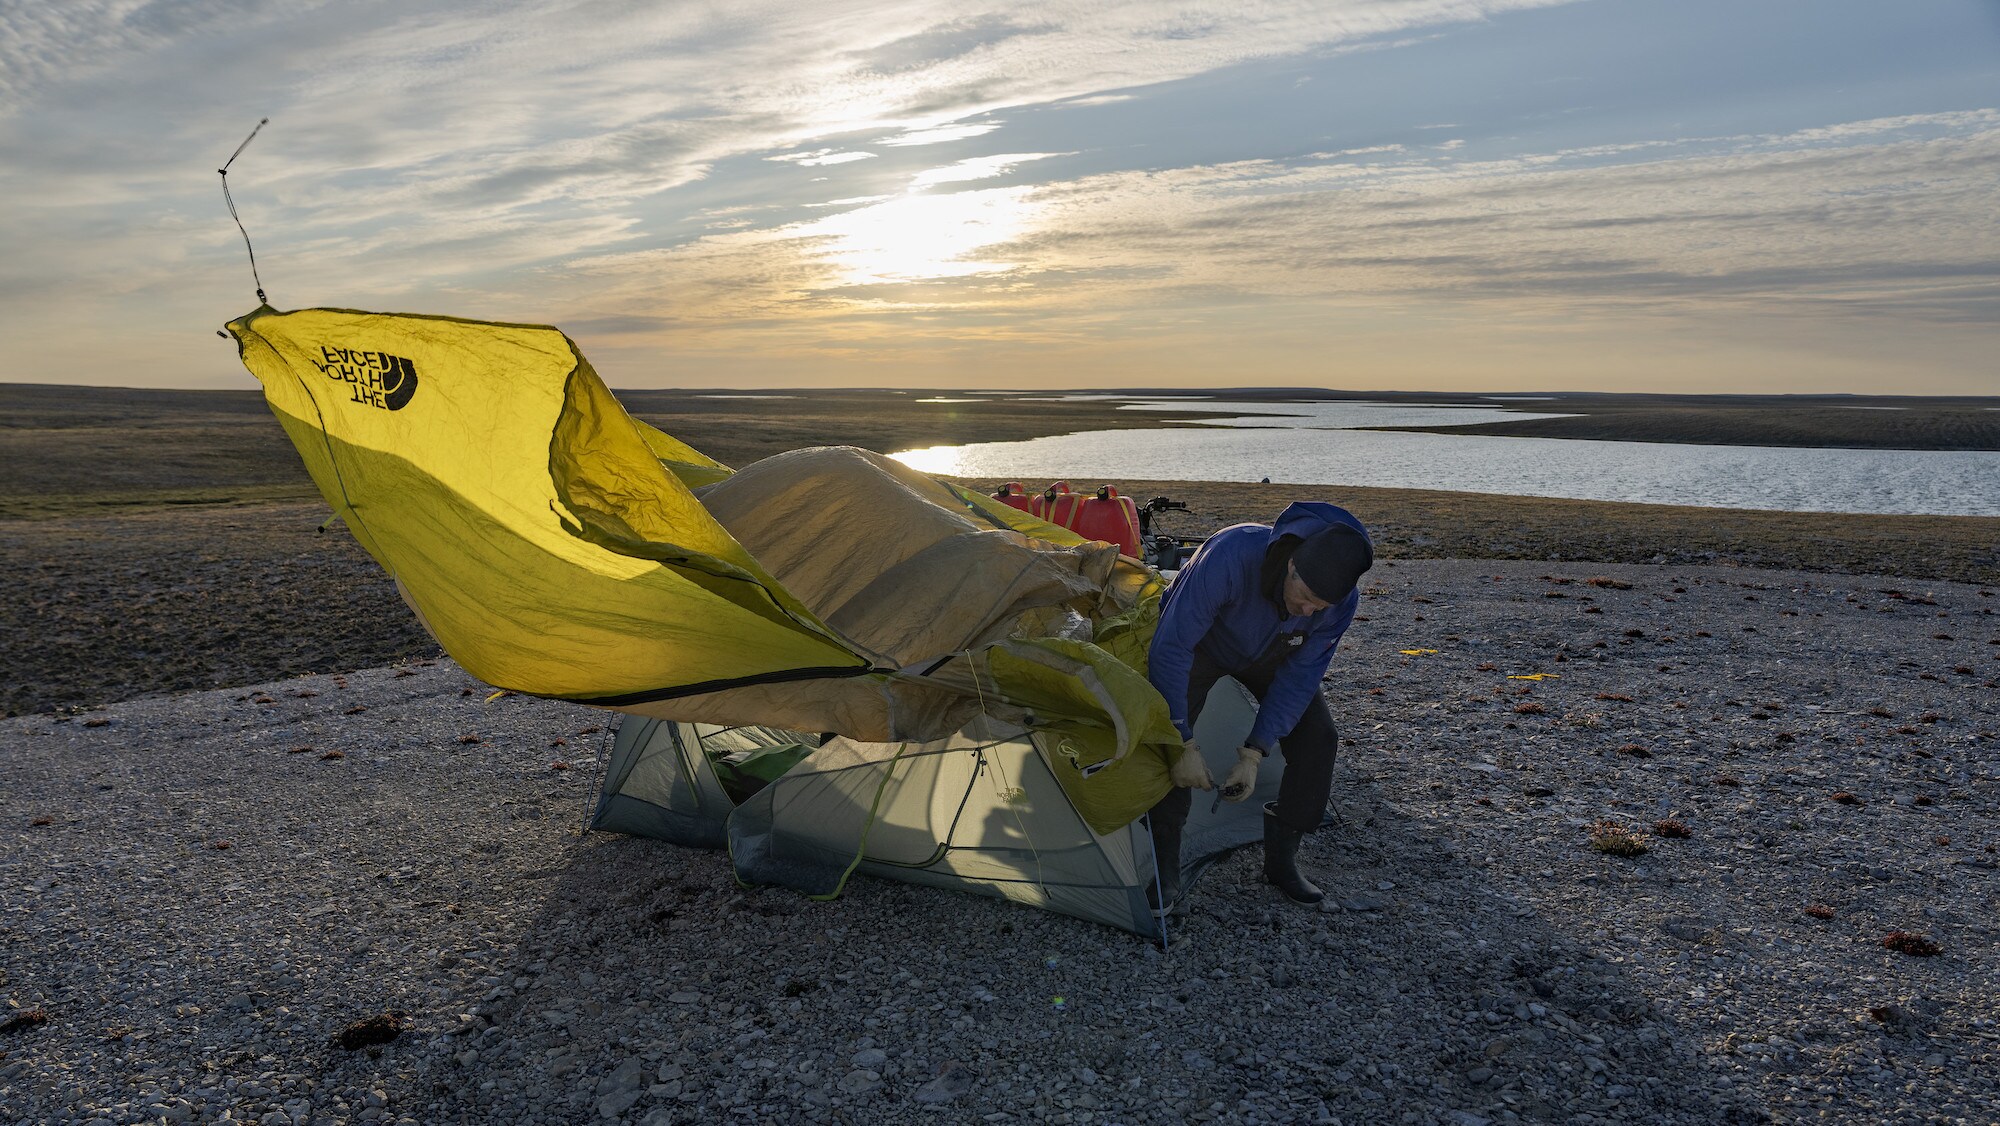 Explorer Mark Synnott ties his tent at base camp on King William Island, Nunavut, Canada. He is part of a team searching for Sir John Franklin's lost tomb on King William Island, Nunavut, Canada. (National Geographic/Renan Ozturk)